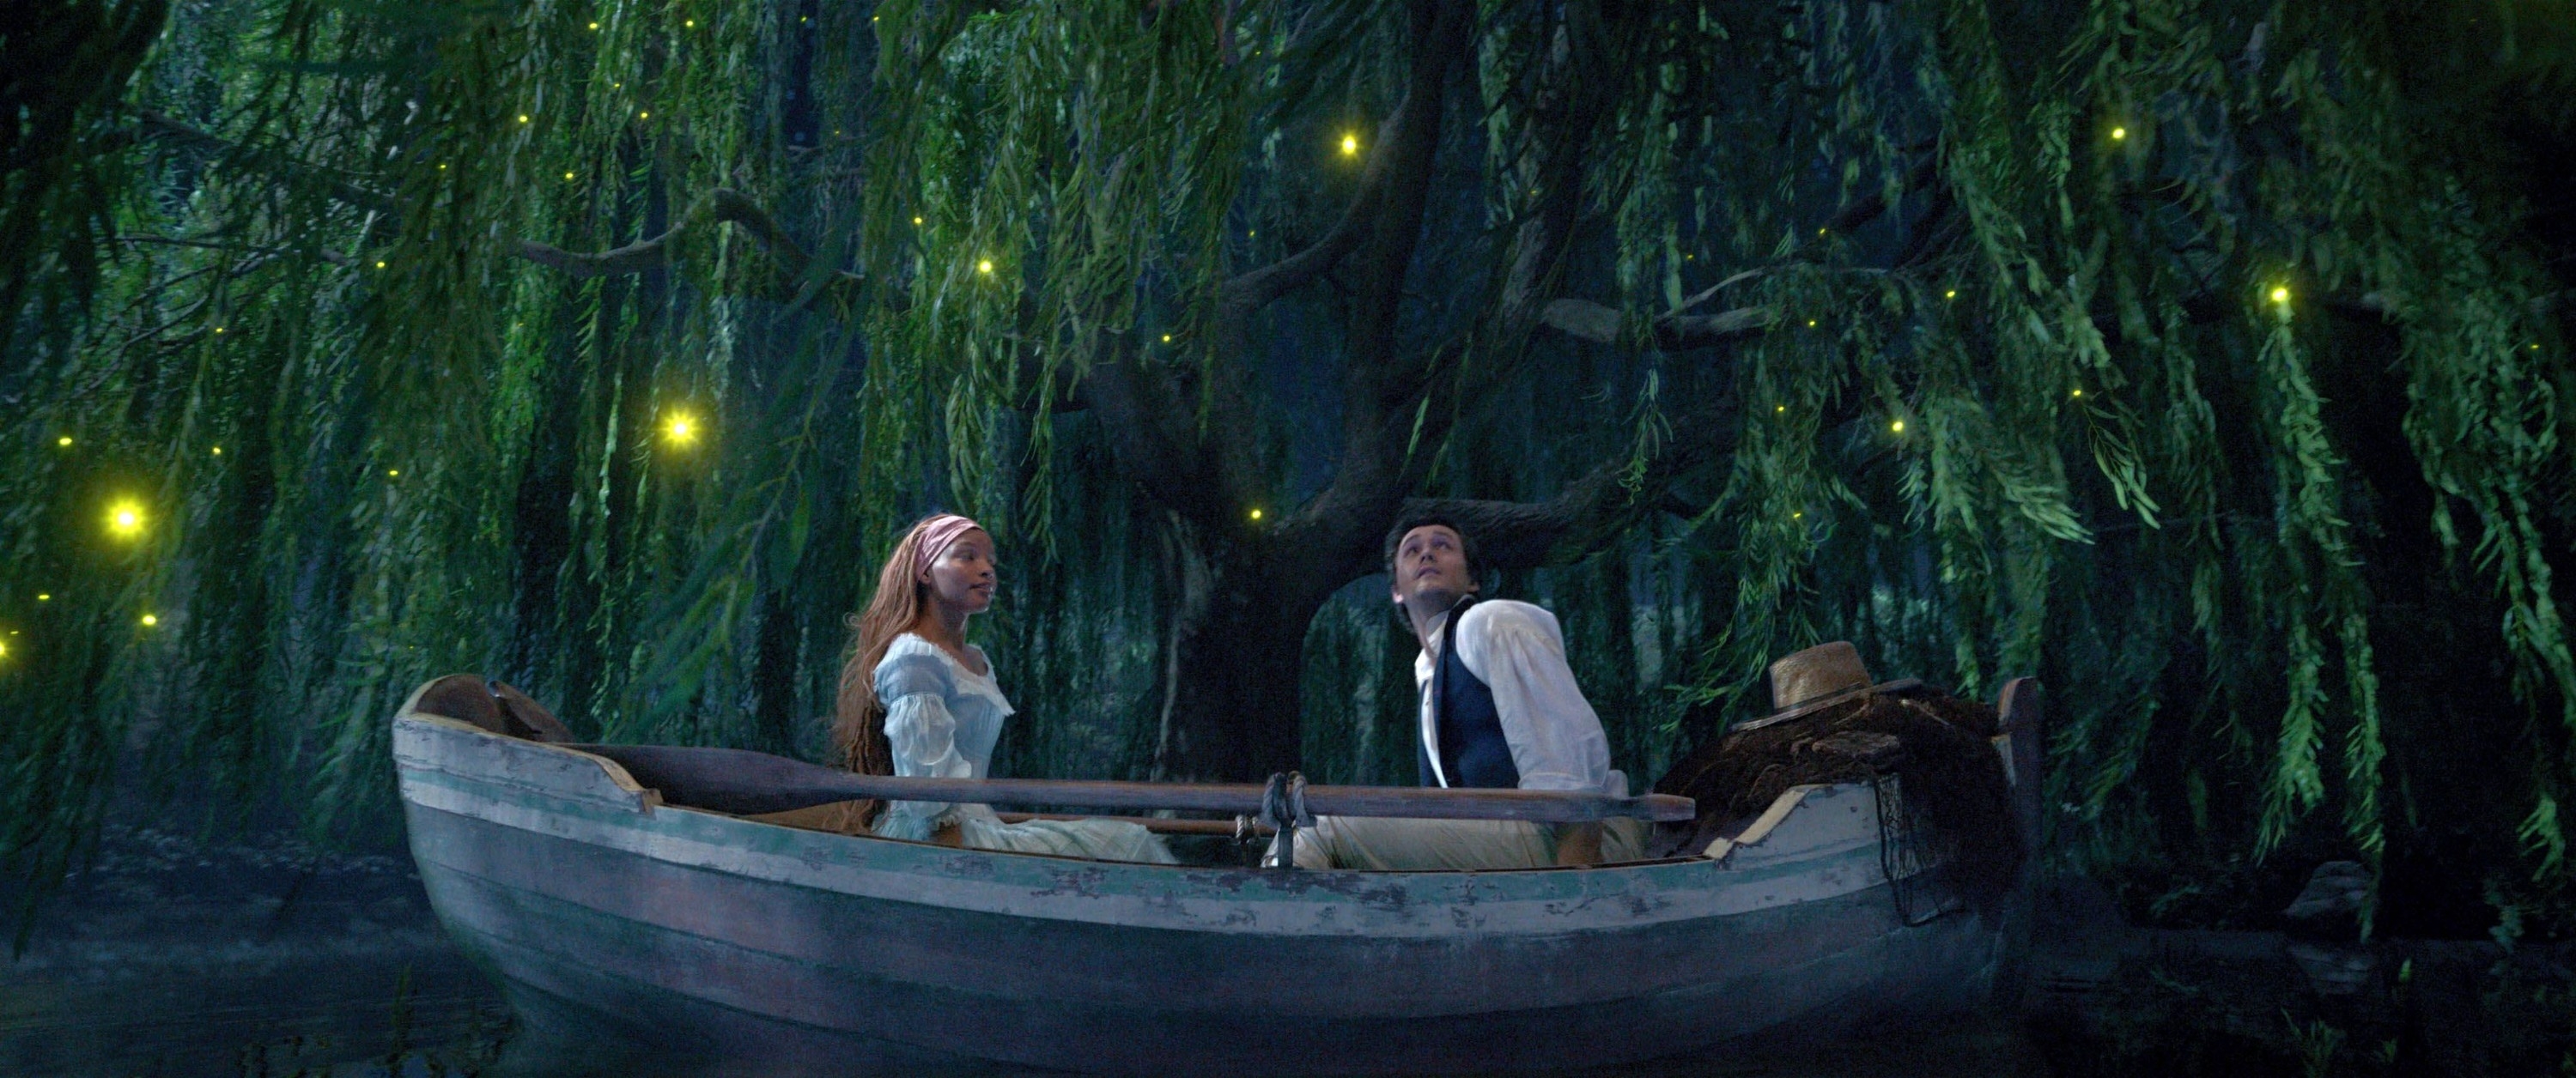 Ariel and Eric in a boat surrounded by lanterns in a scene from Tangled